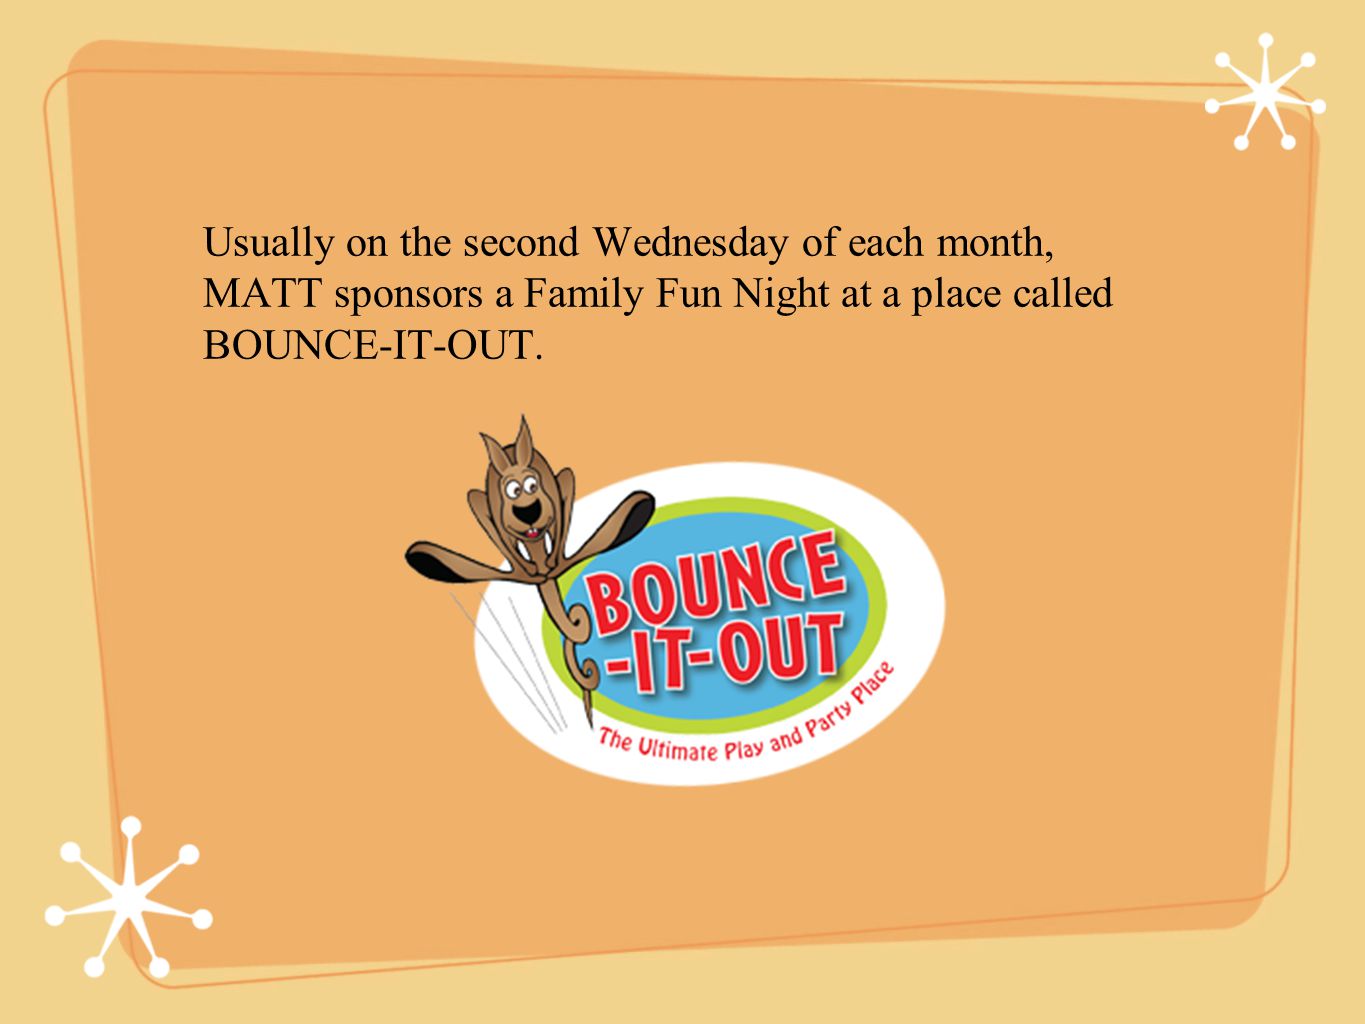 Usually on the second Wednesday of each month, MATT sponsors a Family Fun Night at a place called BOUNCE-IT-OUT.